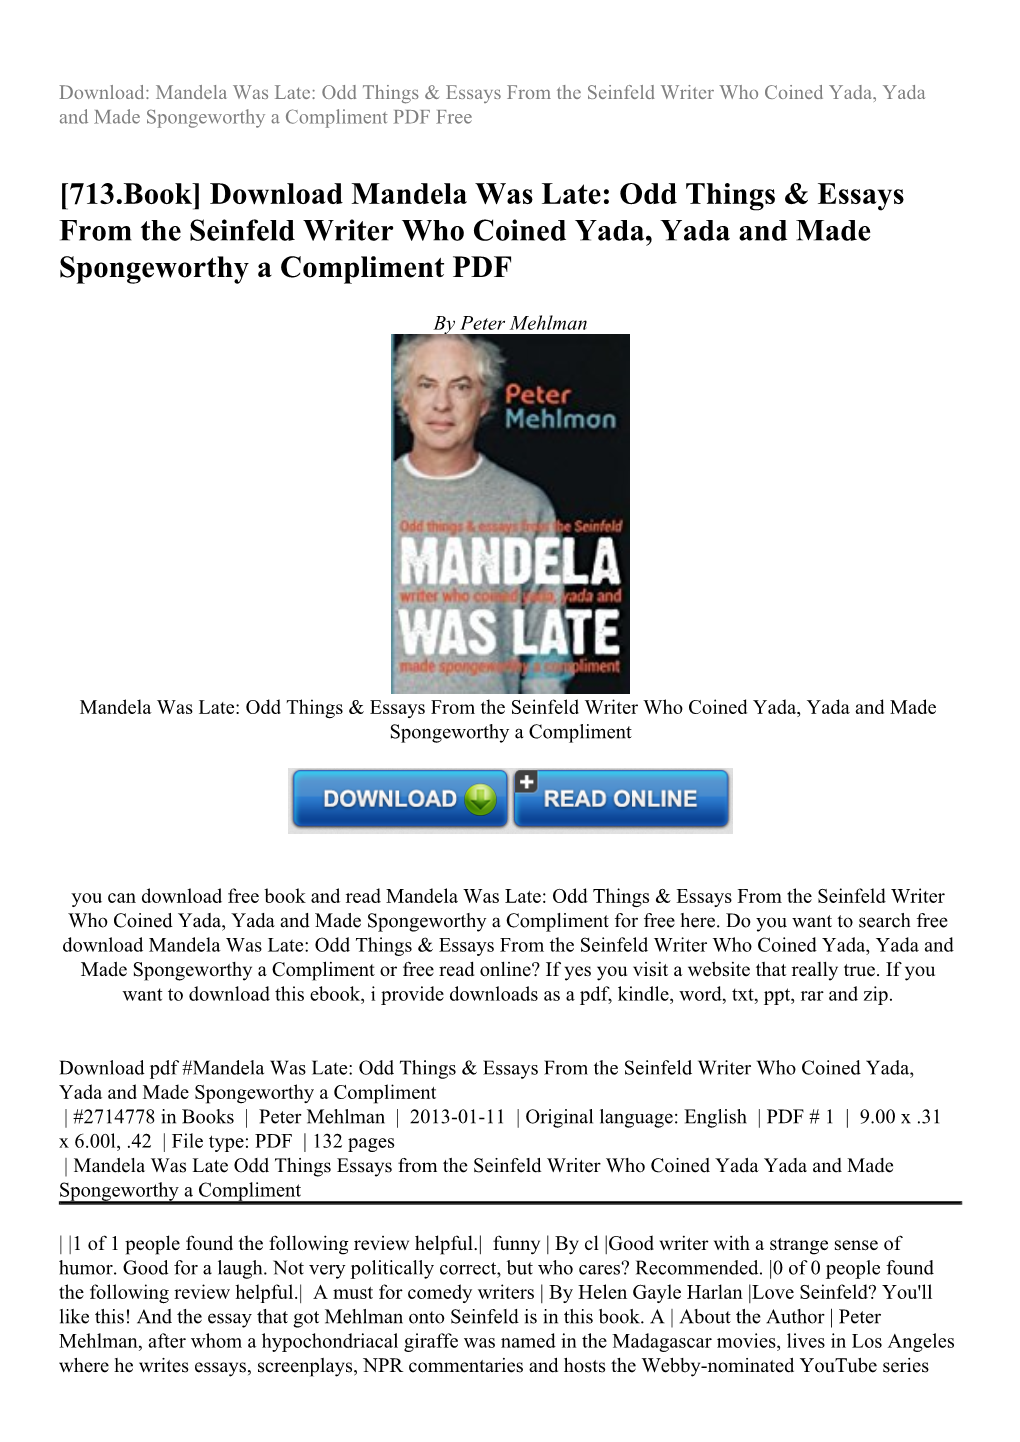 Download Mandela Was Late: Odd Things & Essays from the Seinfeld